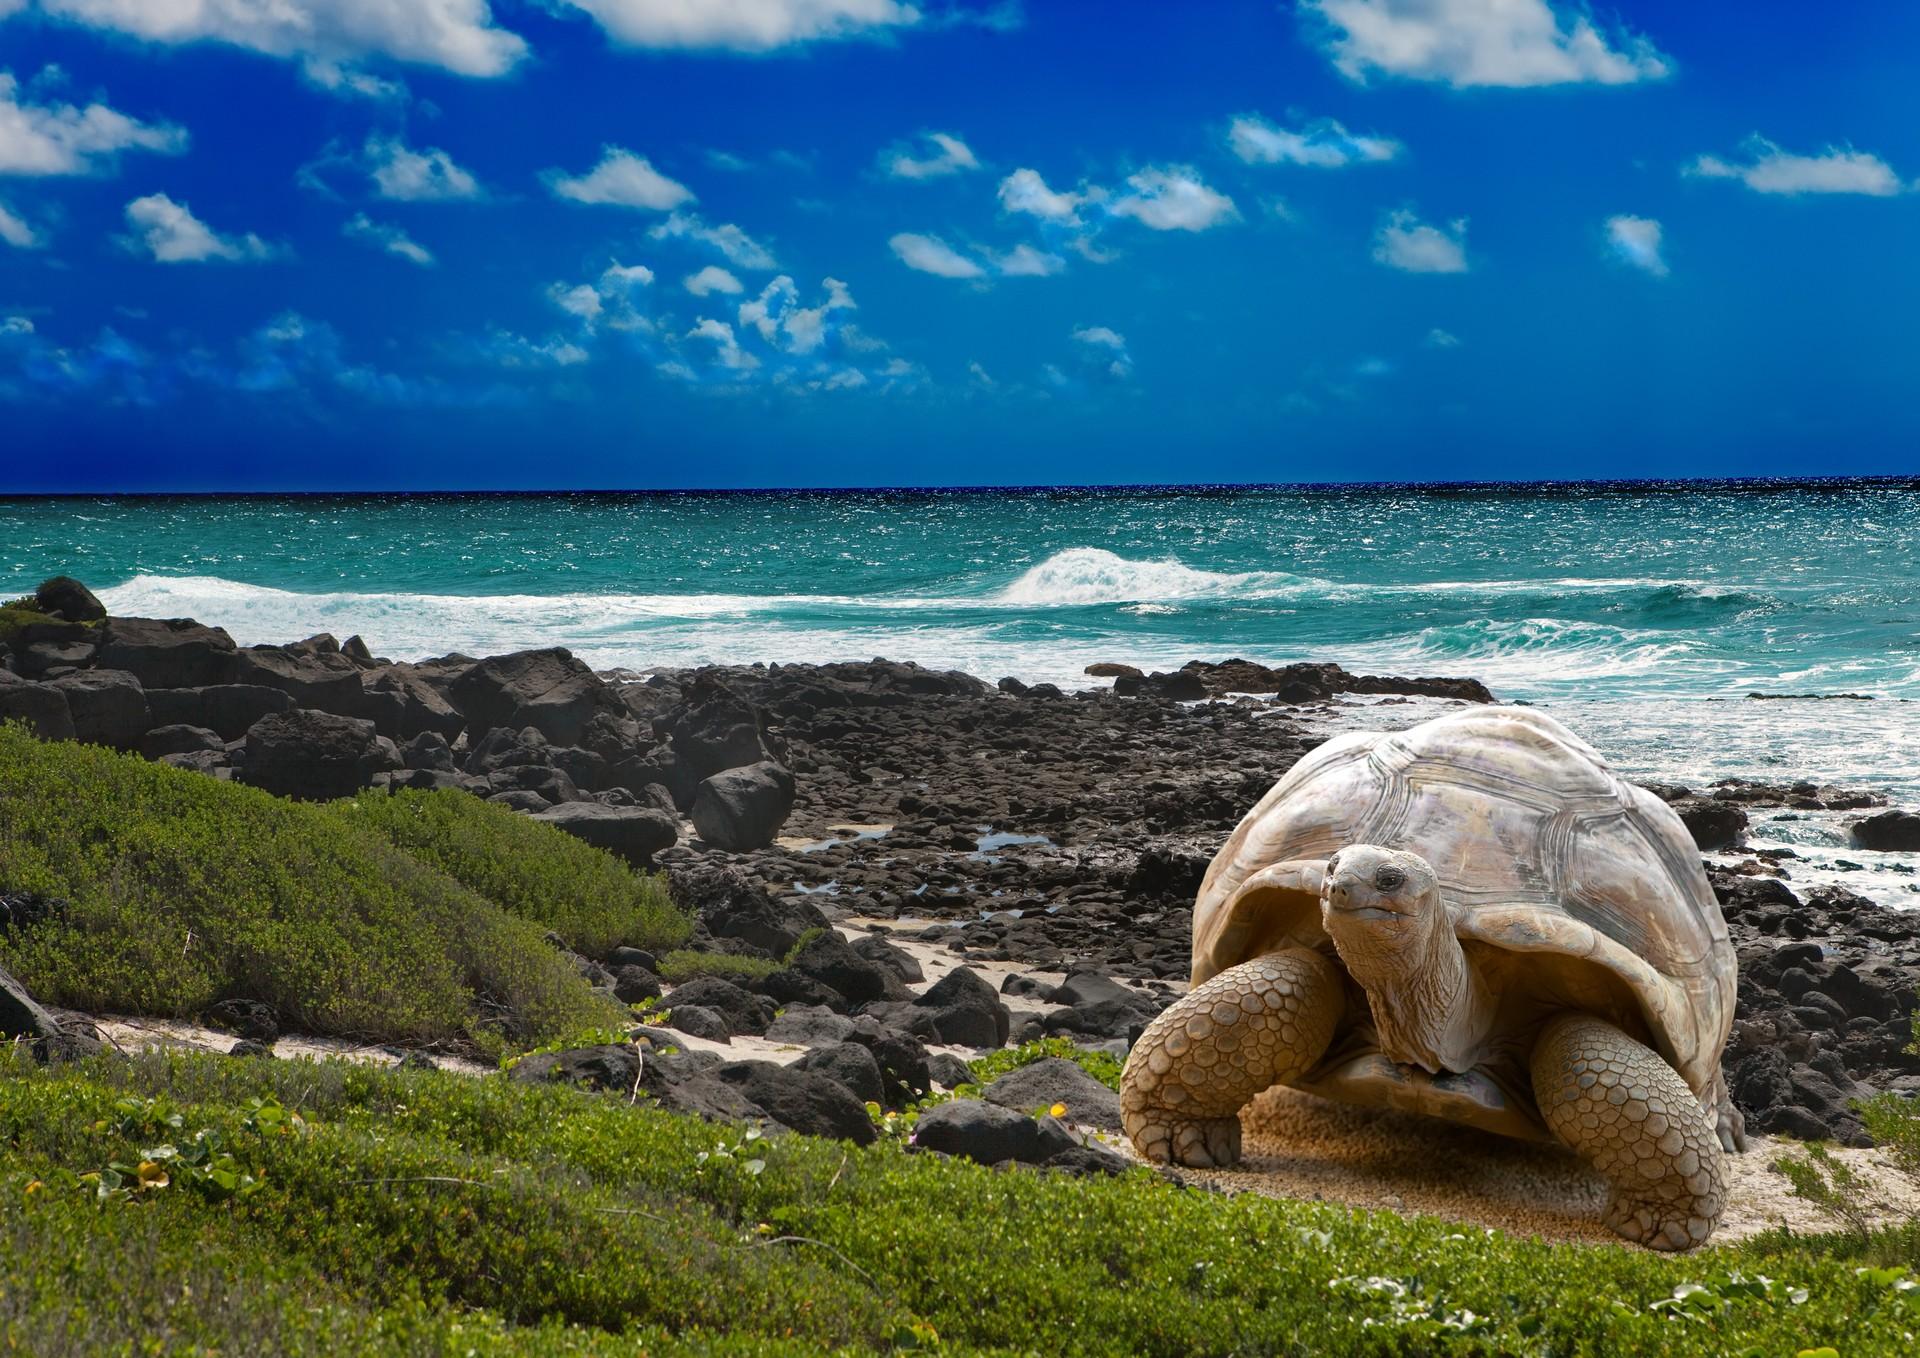 Beach and wildlife in Galápagos Province in sunny weather with few clouds